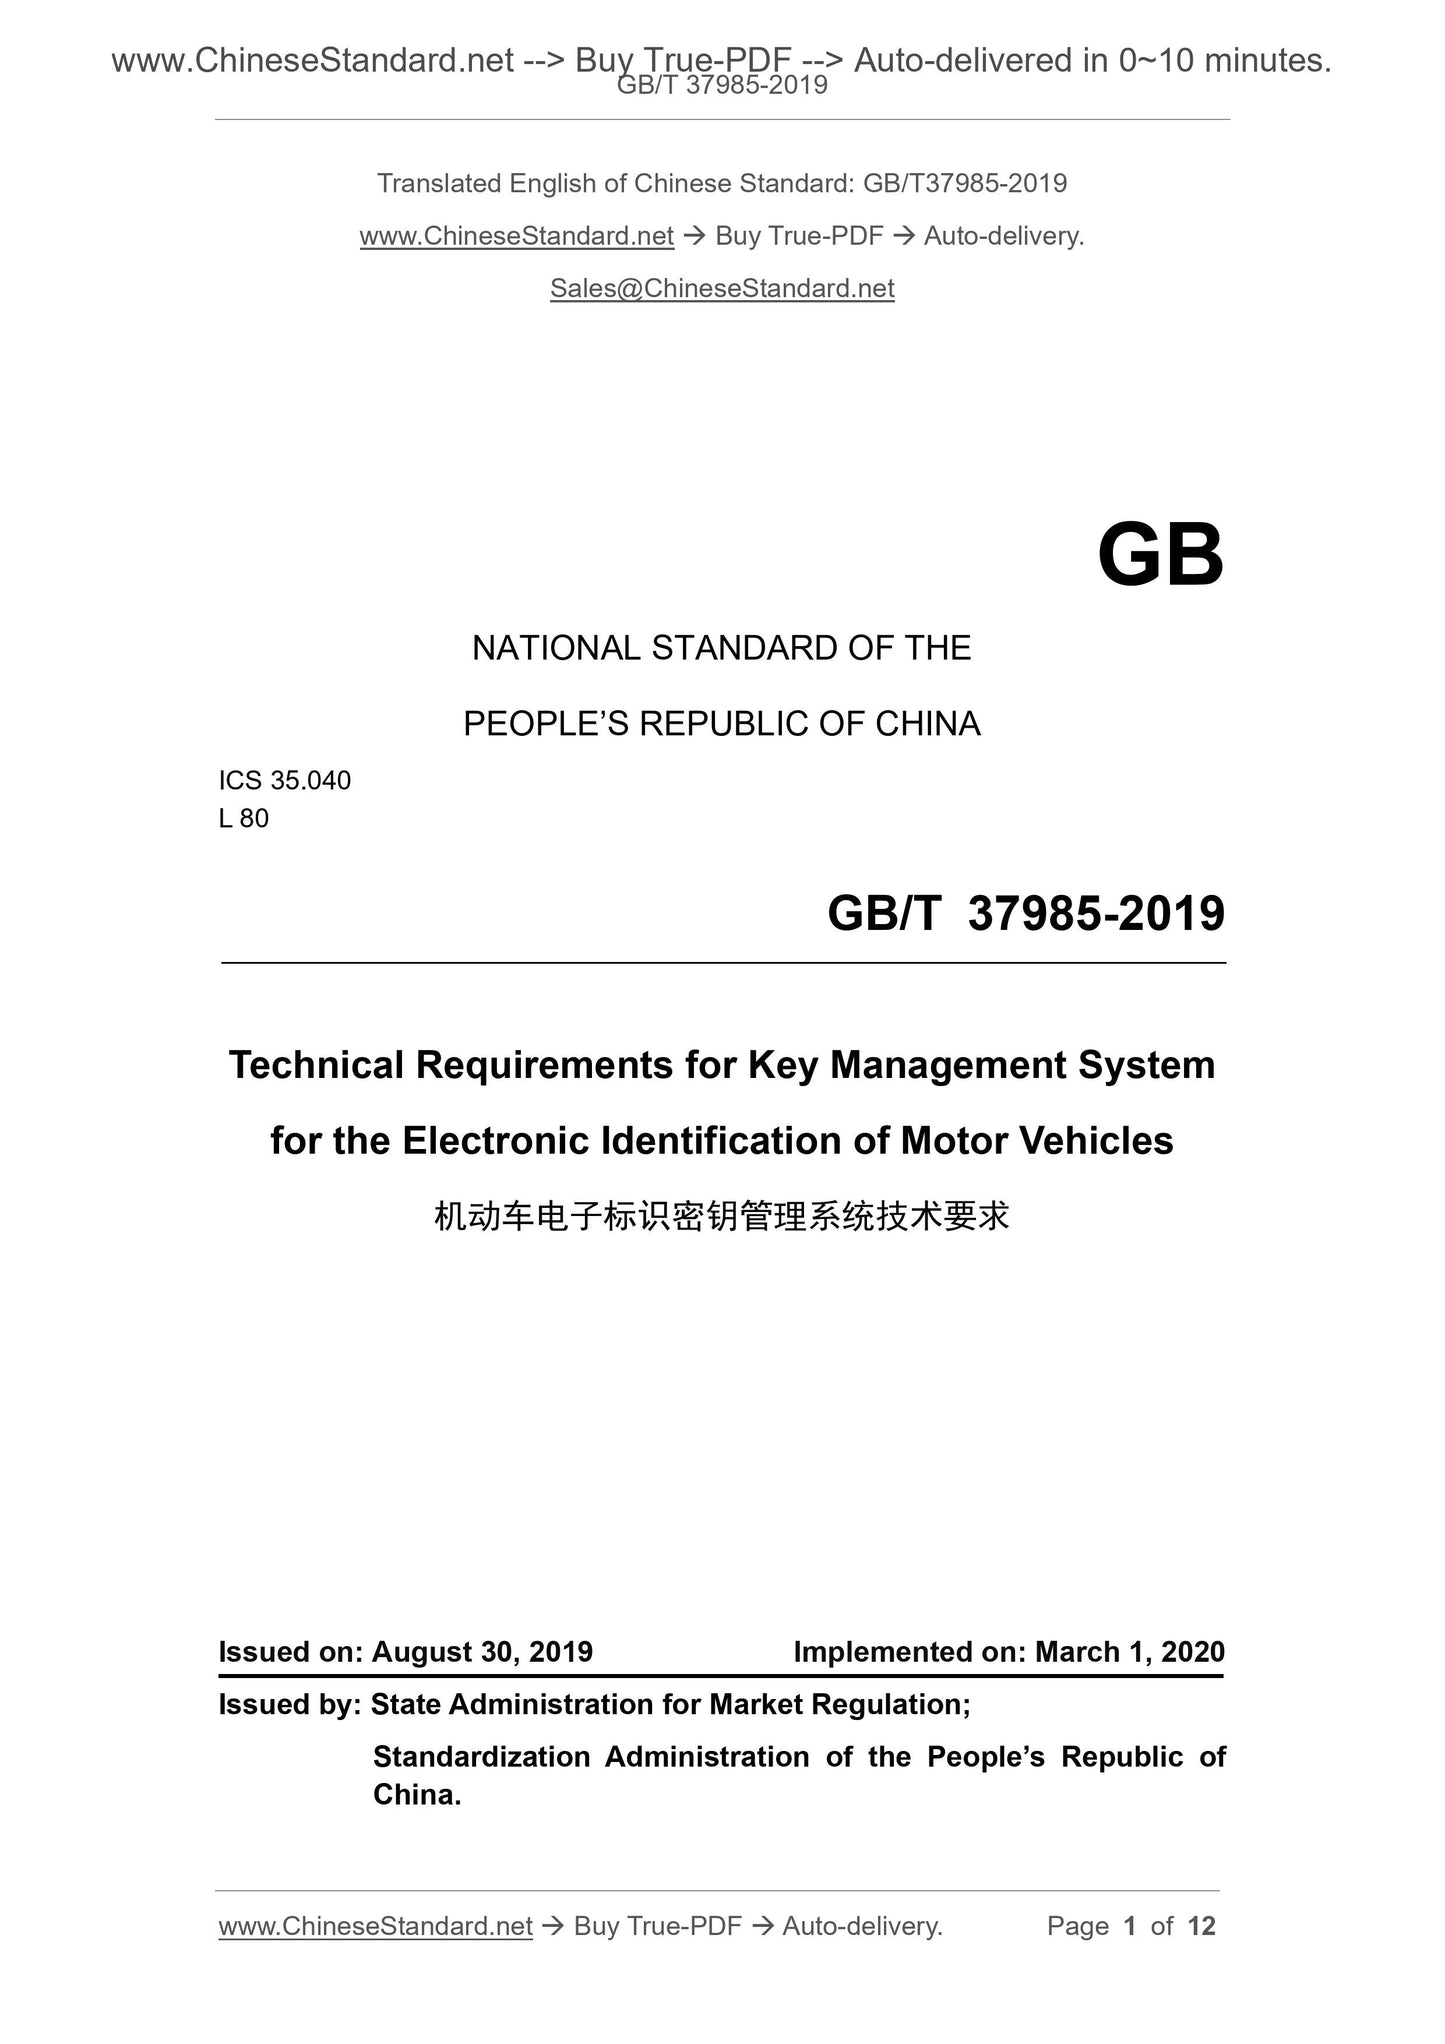 GB/T 37985-2019 Page 1